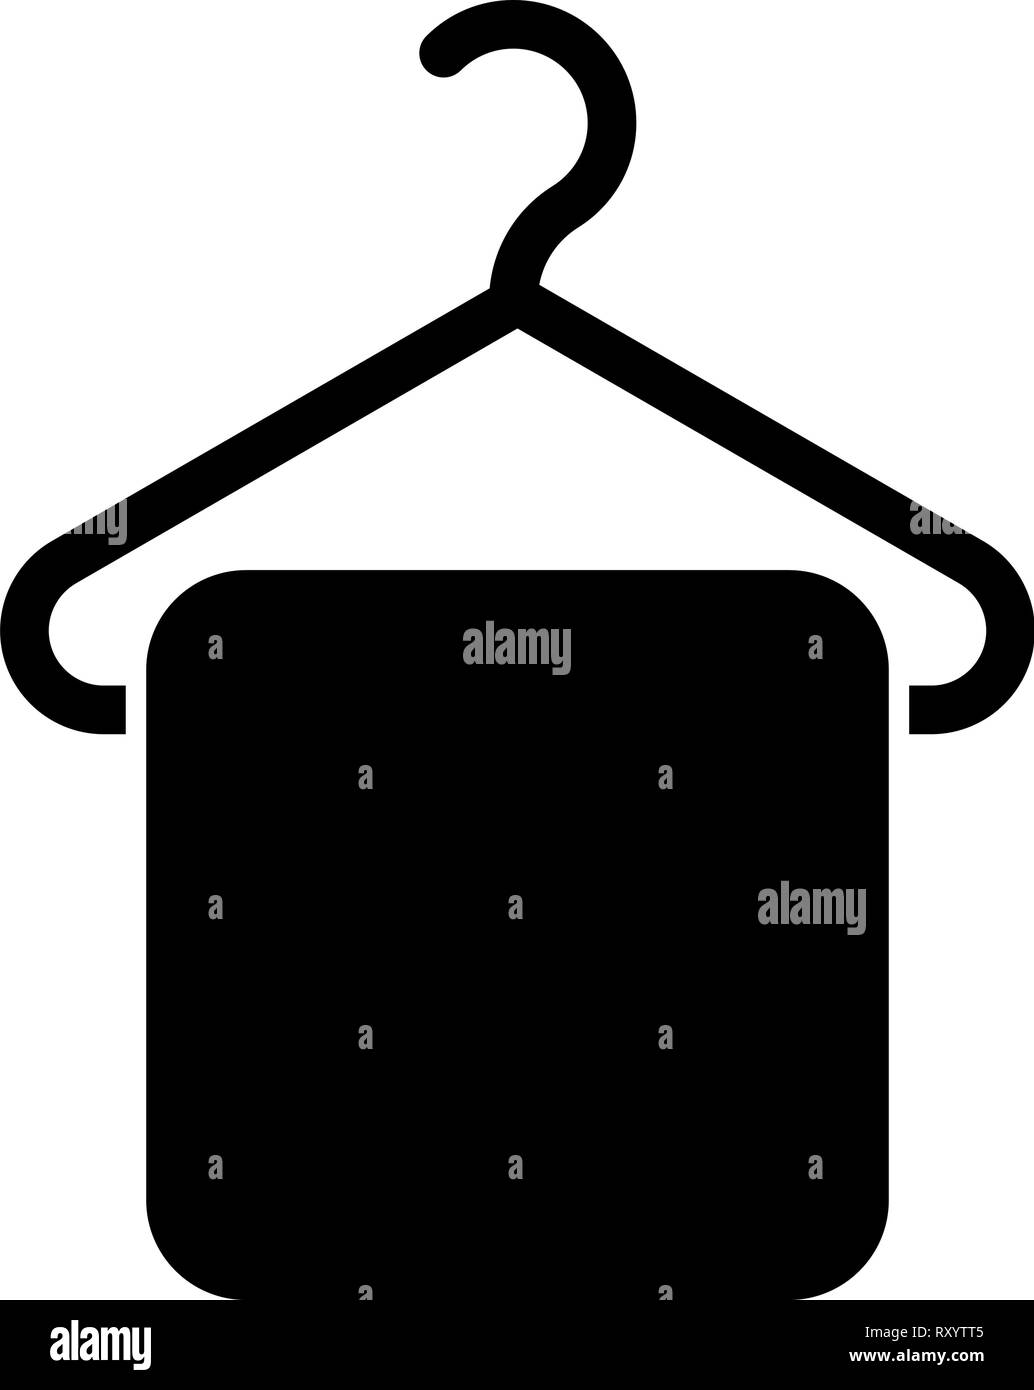 Towel on hanger Hanger towel Clothes hanger with hanging towel icon black color vector illustration flat style simple image Stock Vector